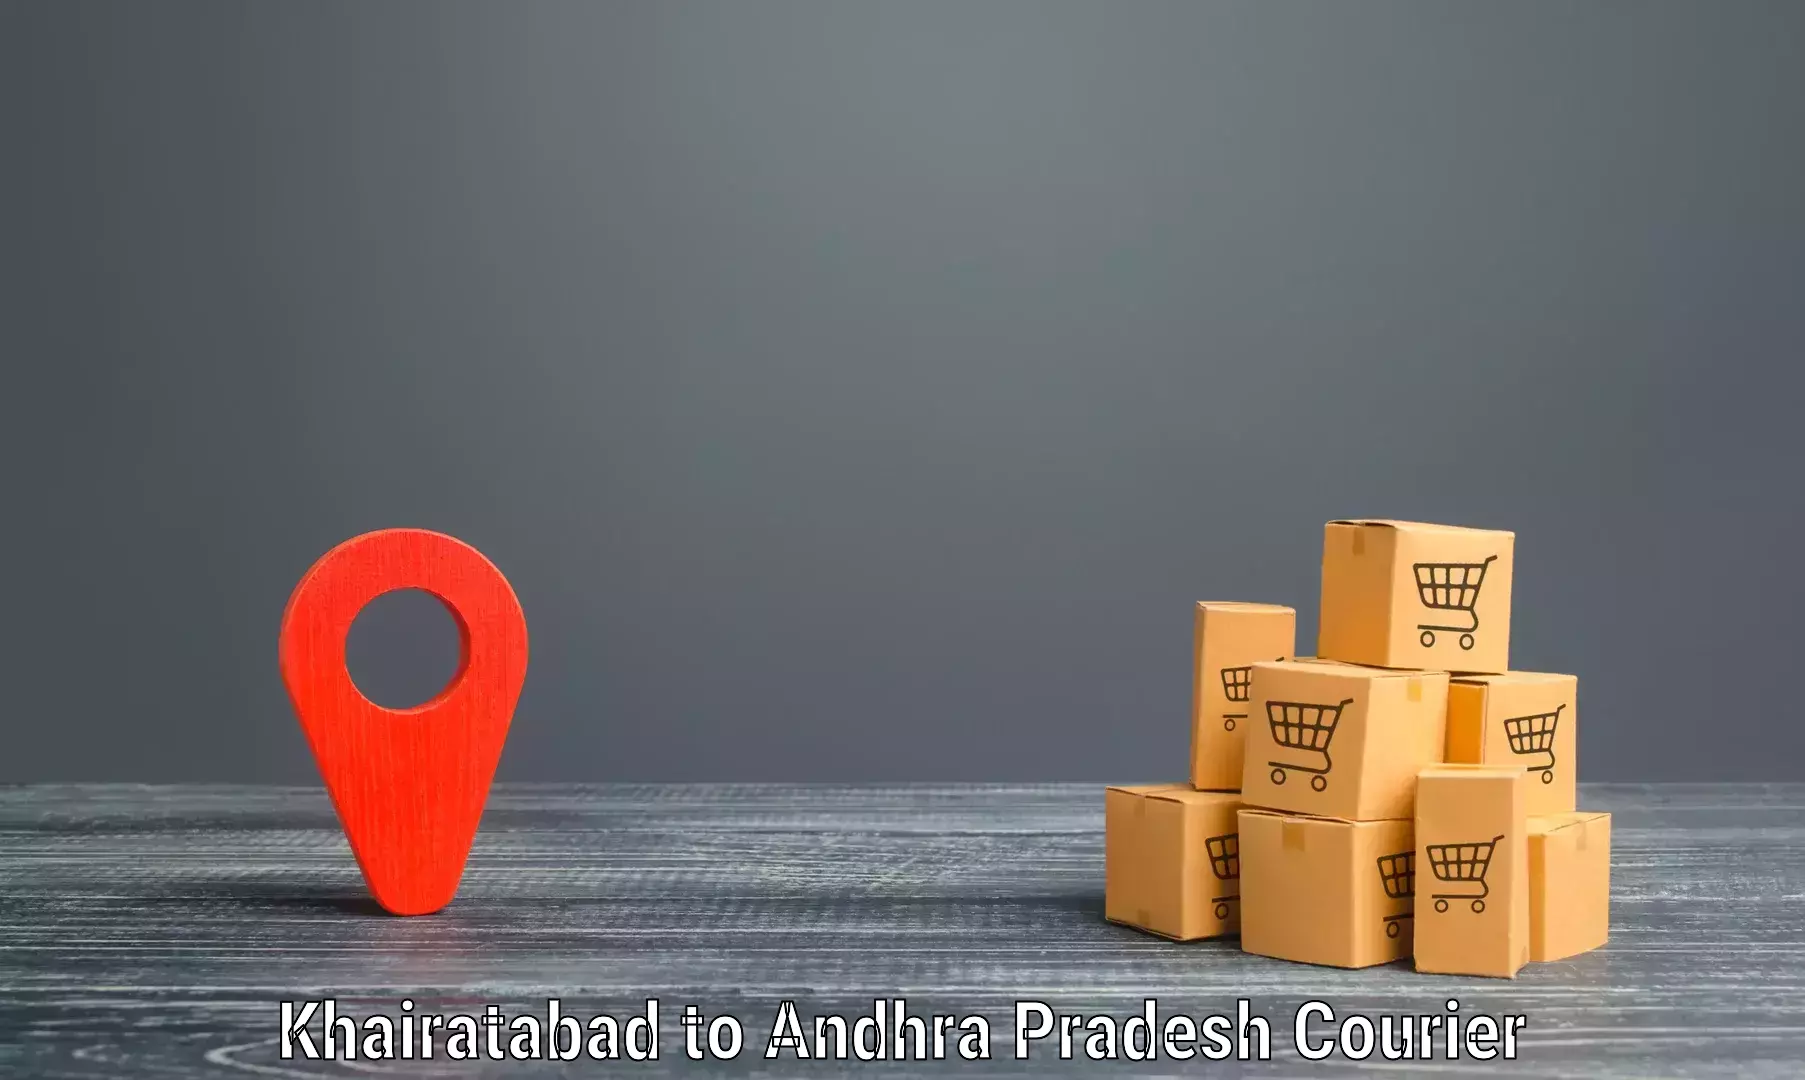 Reliable freight solutions Khairatabad to Adoni